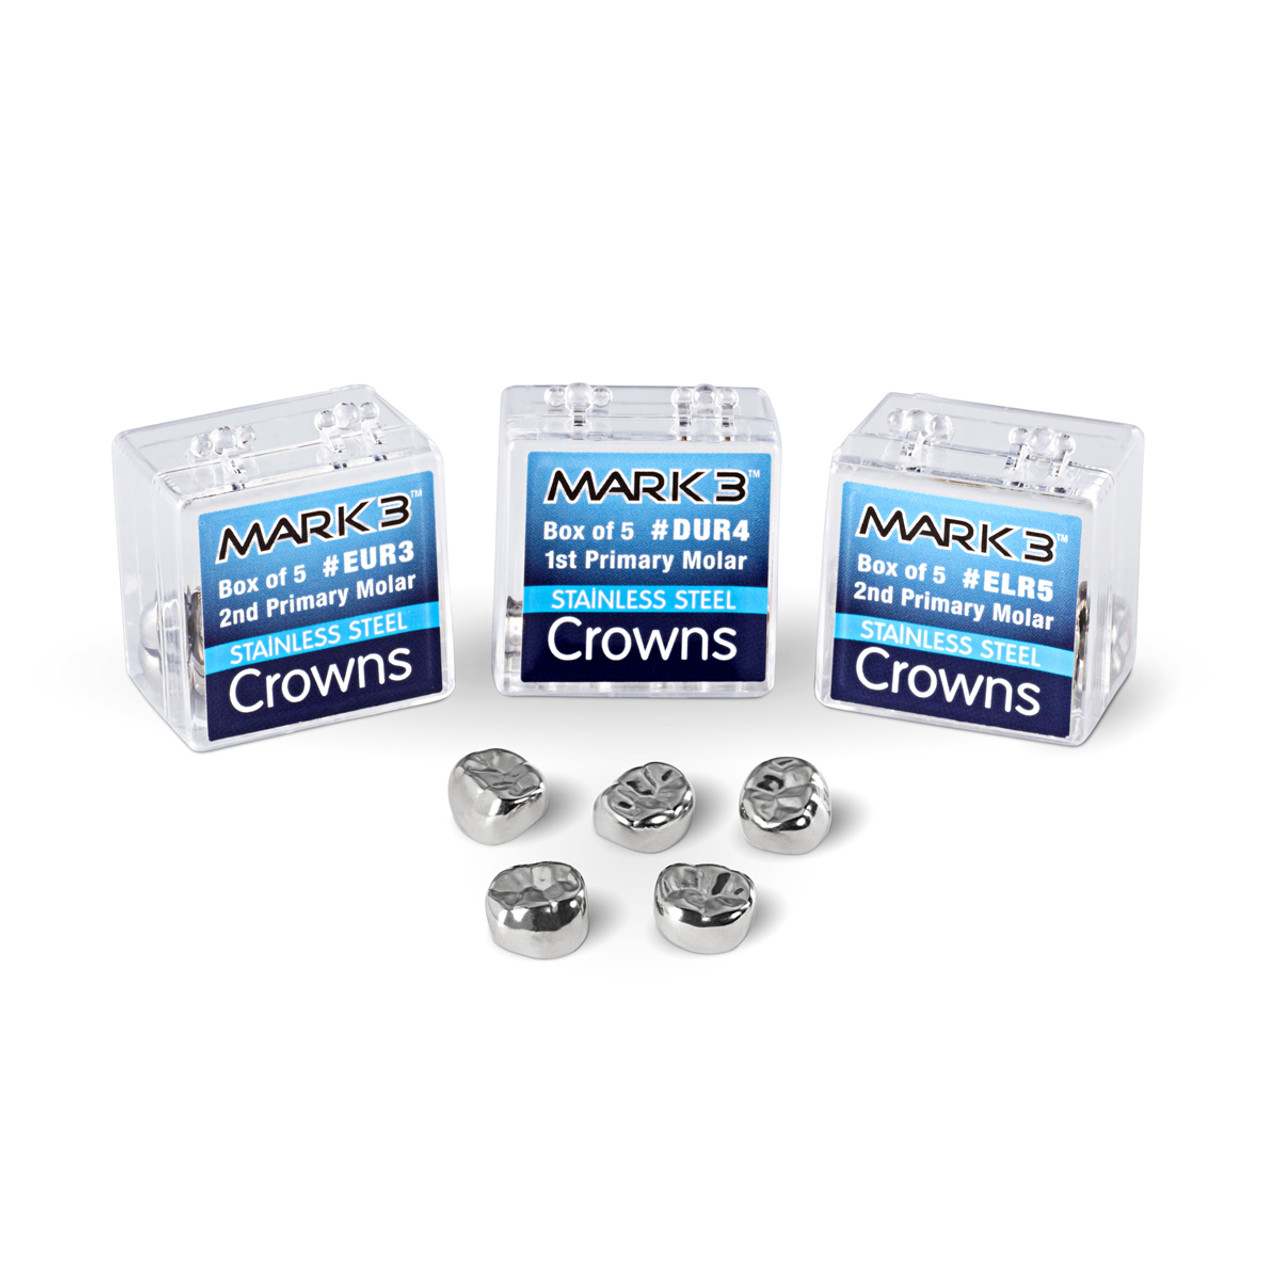 Stainless Steel Crowns 1st Primary Molar D-LL-7 5/bx. - MARK3